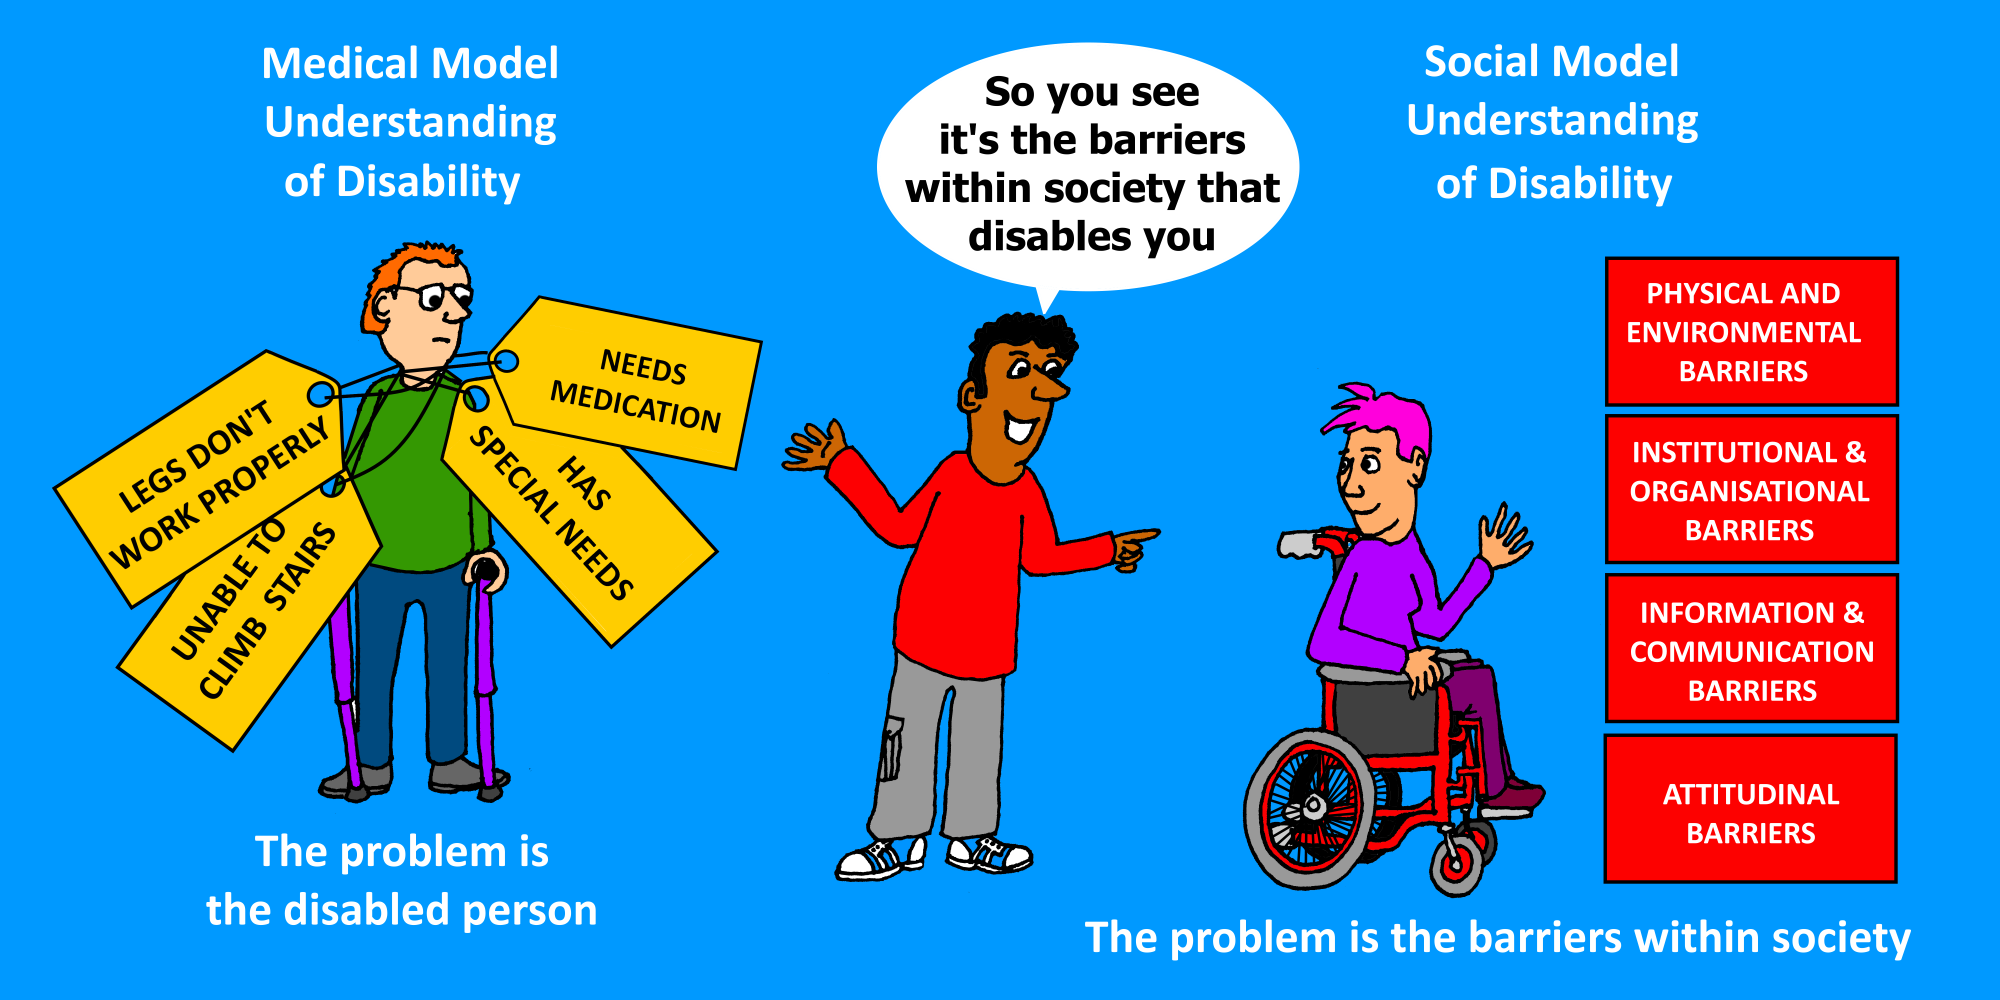 In this cartoon illustration, a person stands on the left under text reading “Medical Model of Understanding Disability.” Around their neck are big tags reading, “Legs don’t work properly,” “Needs Medication,” “Unable to Climb Stairs,” and “Has Special Needs.” Below their feet is text that reads “The problem is the disabled person” to reiterate the problematic idea of the Medical Model of Understanding Disability. To the right is a person in a wheelchair with the text “Social Model of Understanding” above their head. To their right are blocks of text including, “Physical and Environmental Barriers,” Institutional and Organisational Barriers,” “Information and Communication Barriers,” and “Attitudinal Barriers.” The text below their feet reads “The problem is the barriers within society.” There’s a person in the middle with a speech bubble that reads “So you see it’s the barriers within society that disables you.”